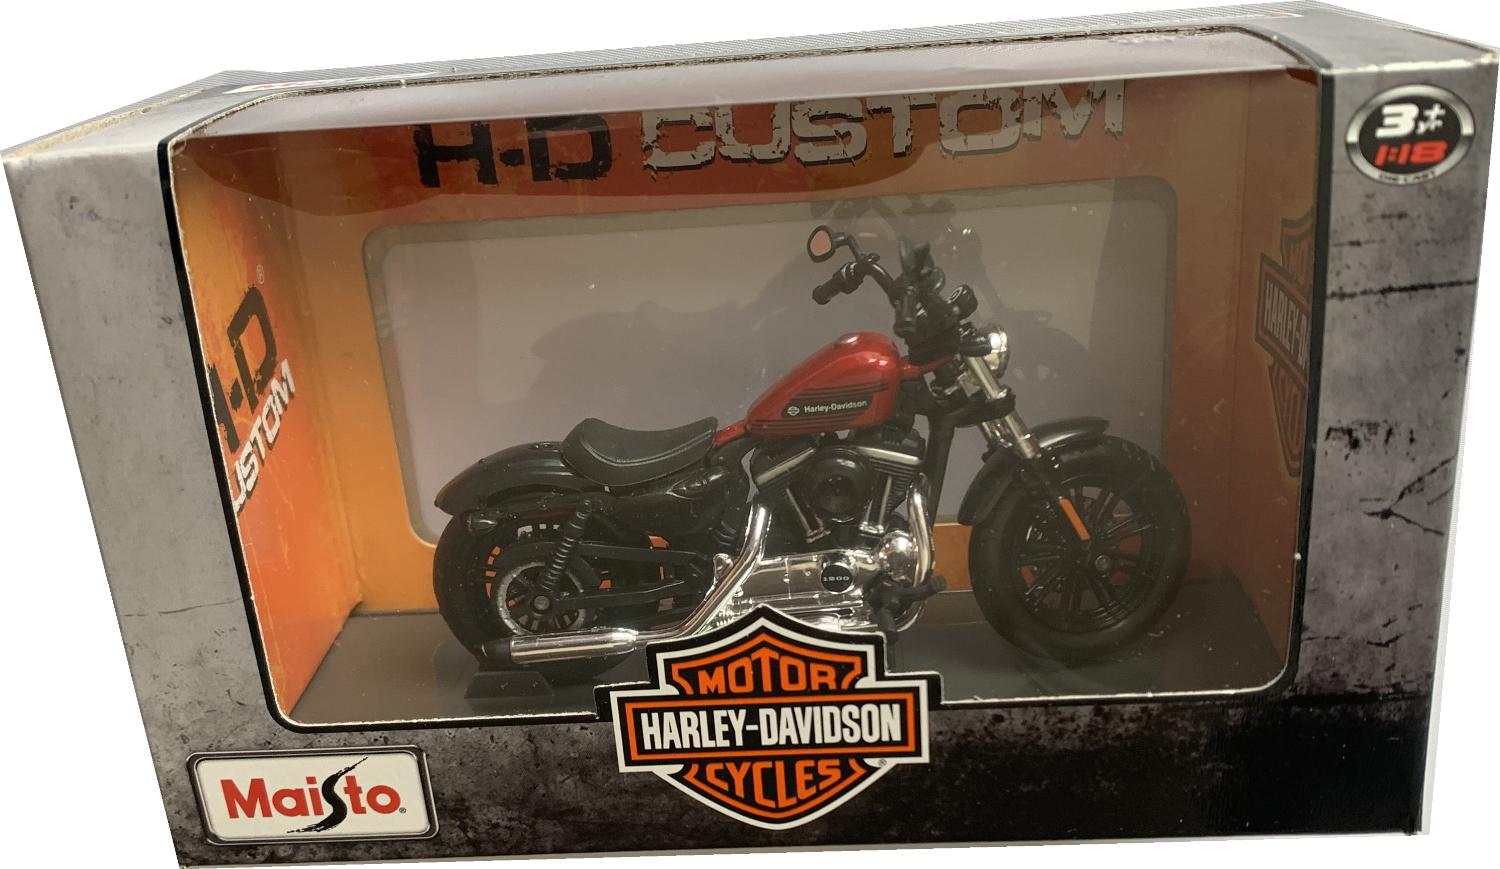 Harley Davidson 2018 Forty Eight Special (Australian Version) in red / black 1:18 scale motorcycle model from Maisto